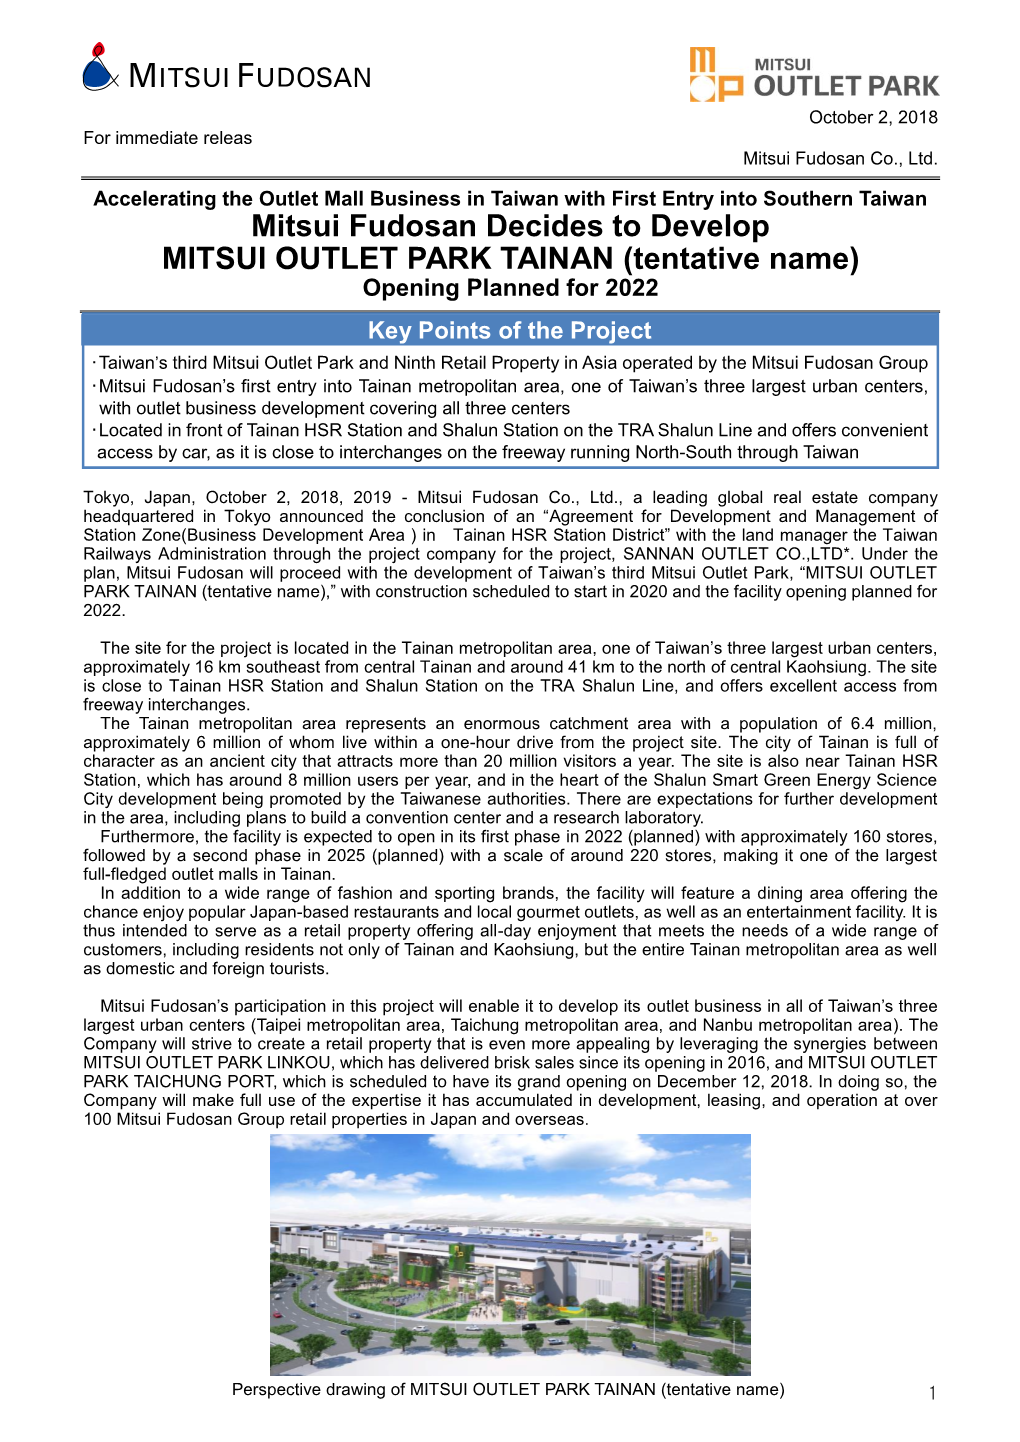 Mitsui Fudosan Decides to Develop MITSUI OUTLET PARK TAINAN (Tentative Name) Opening Planned for 2022